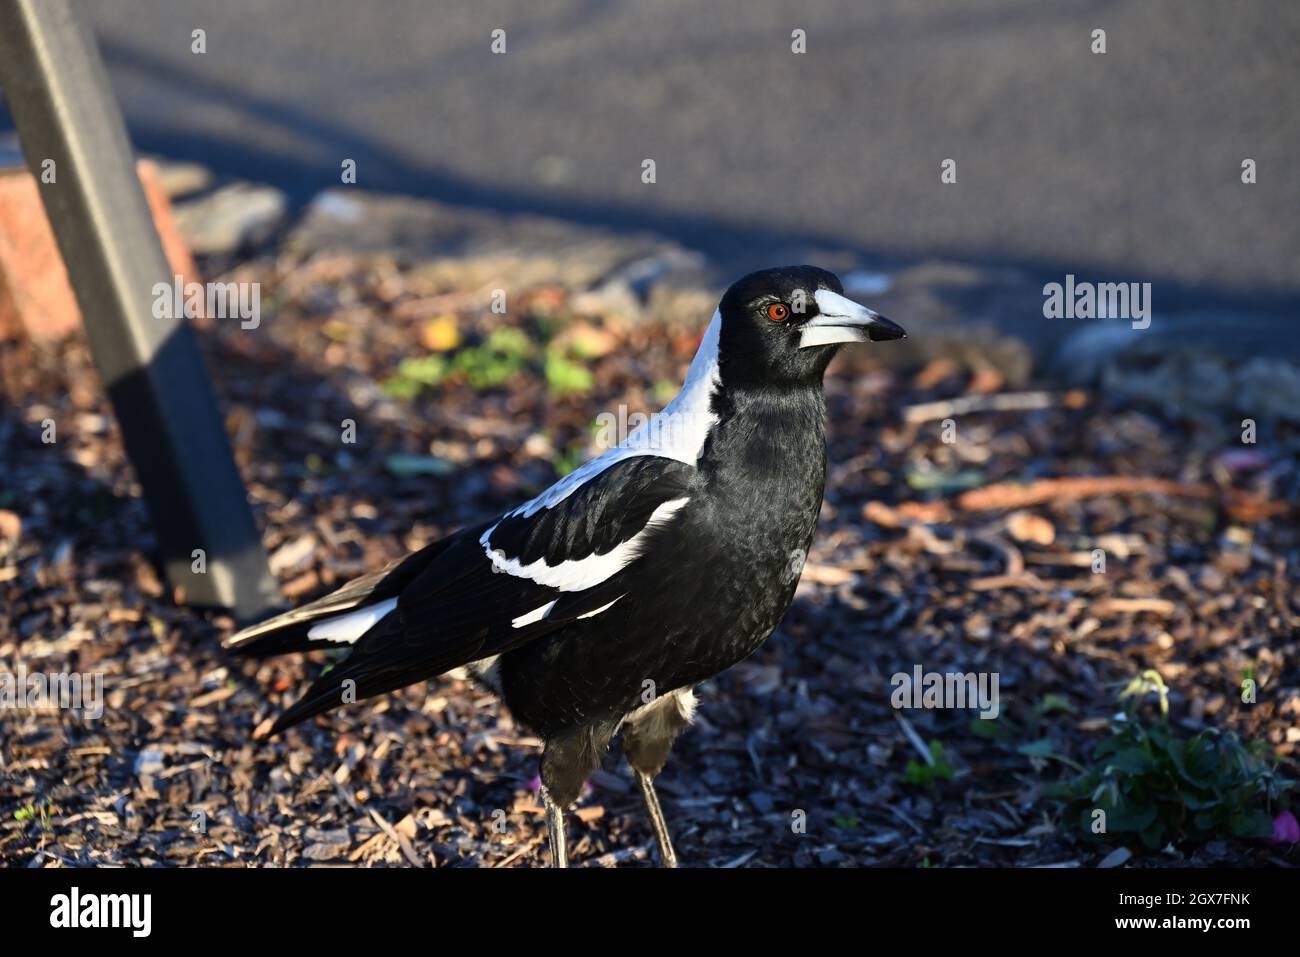 Australian magpie standing in the middle of a garden bed, its eye illuminated by the setting sun Stock Photo